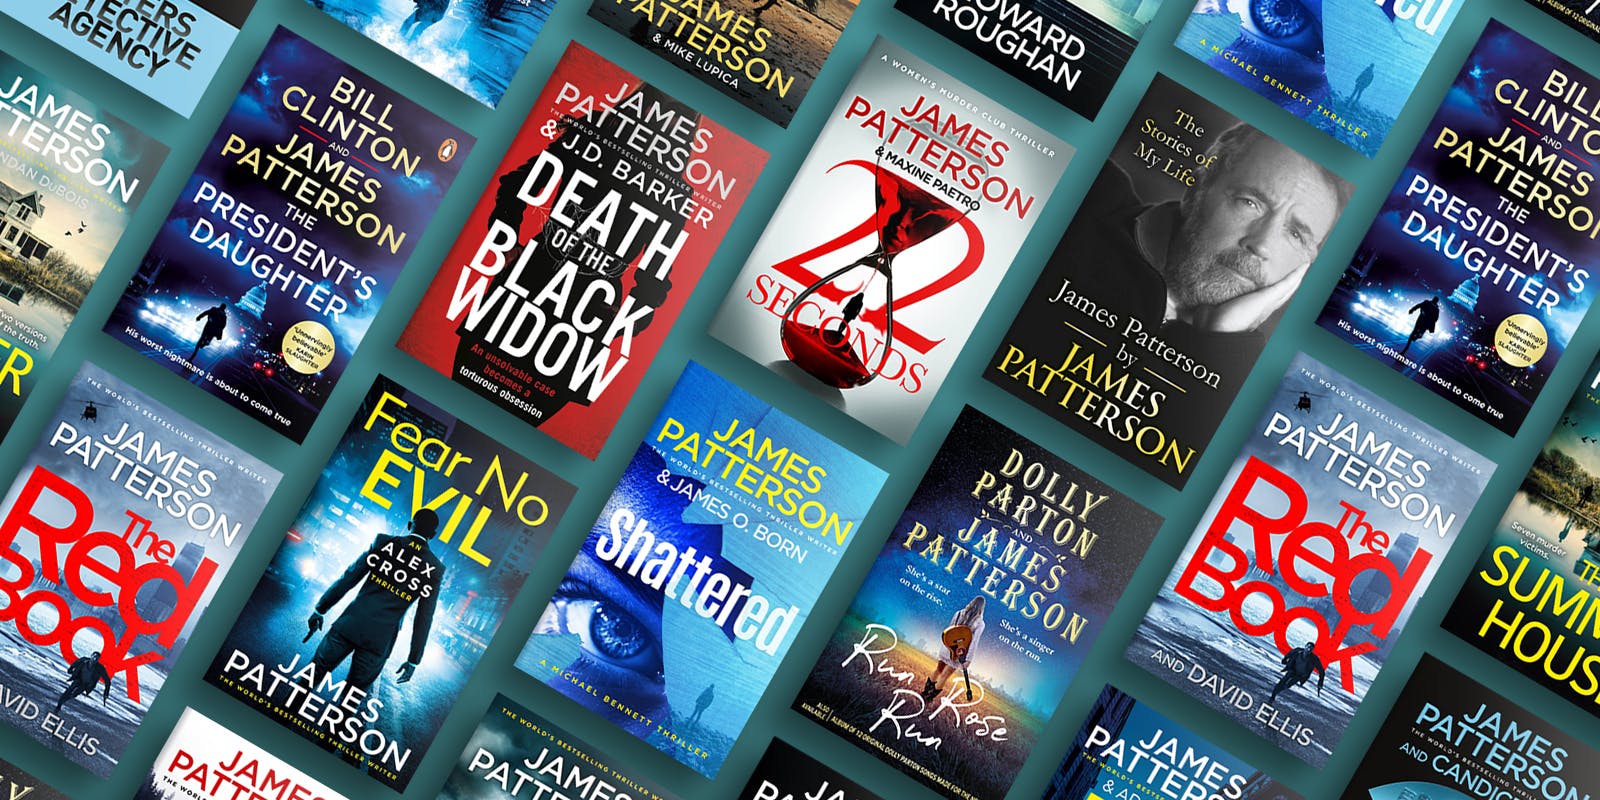 Quiz: Which James Patterson Character Are You?